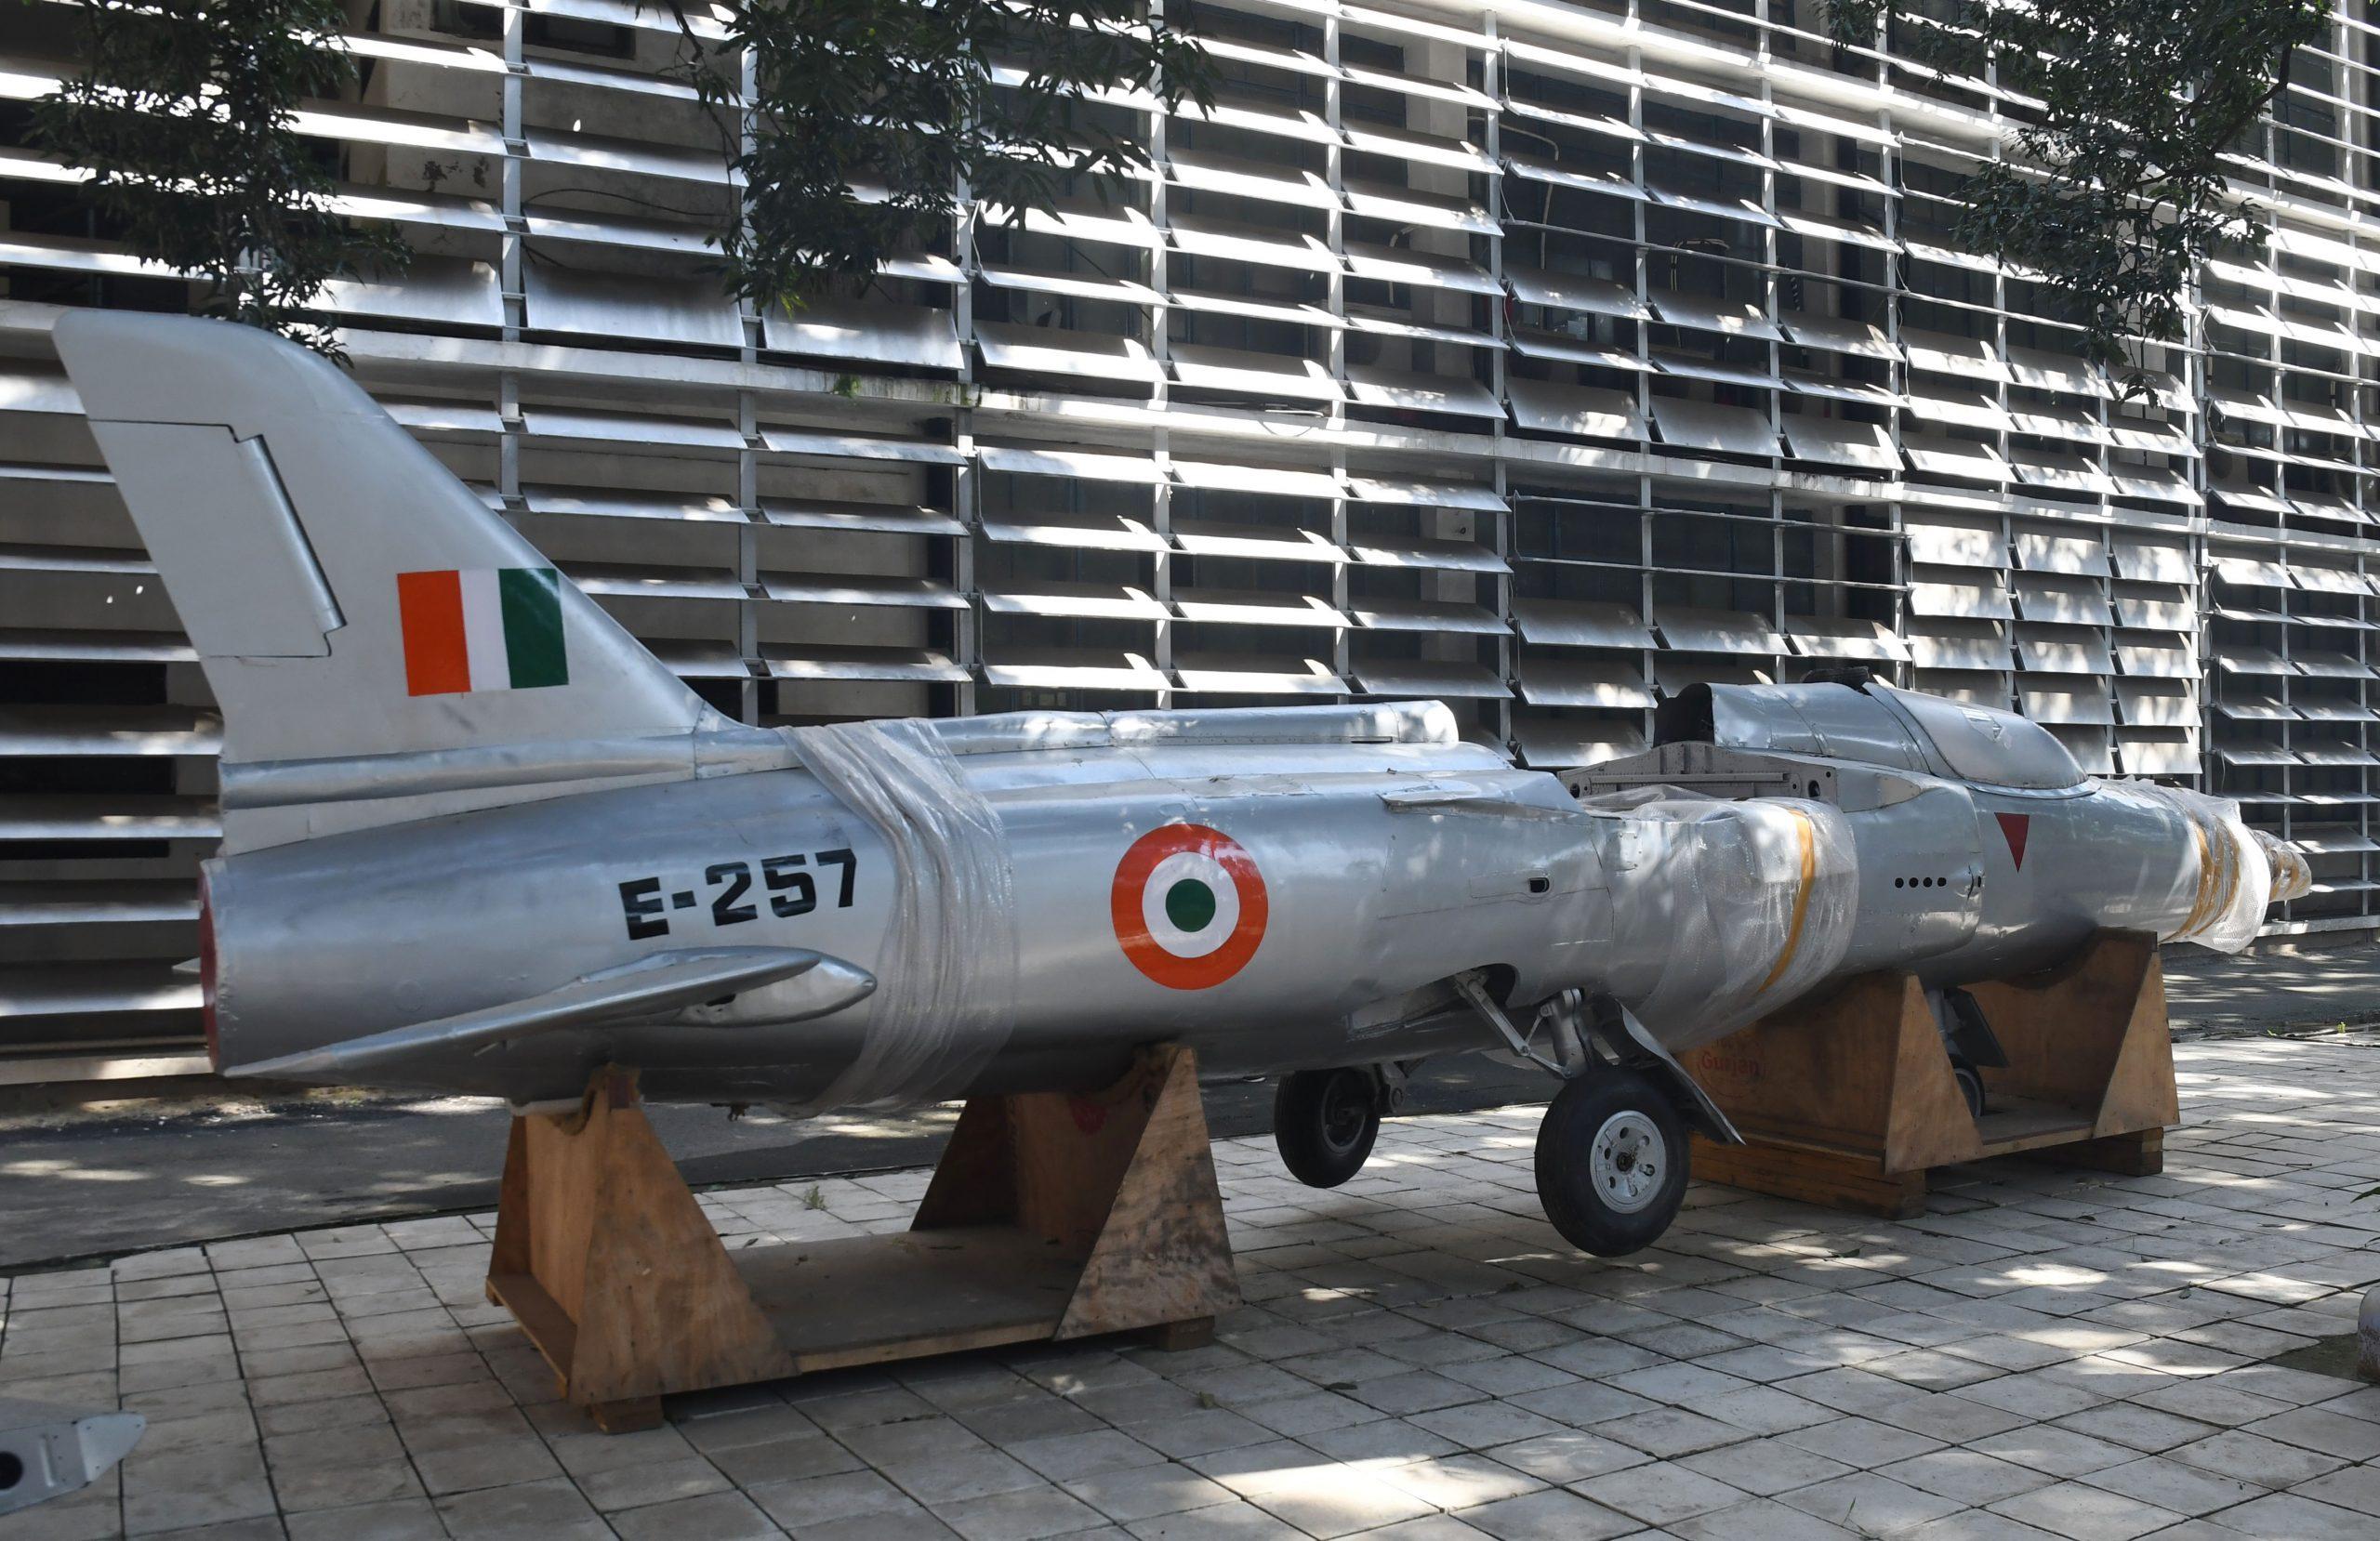 IAF heritage centre: IAF heritage centre to come up in Chandigarh_40.1